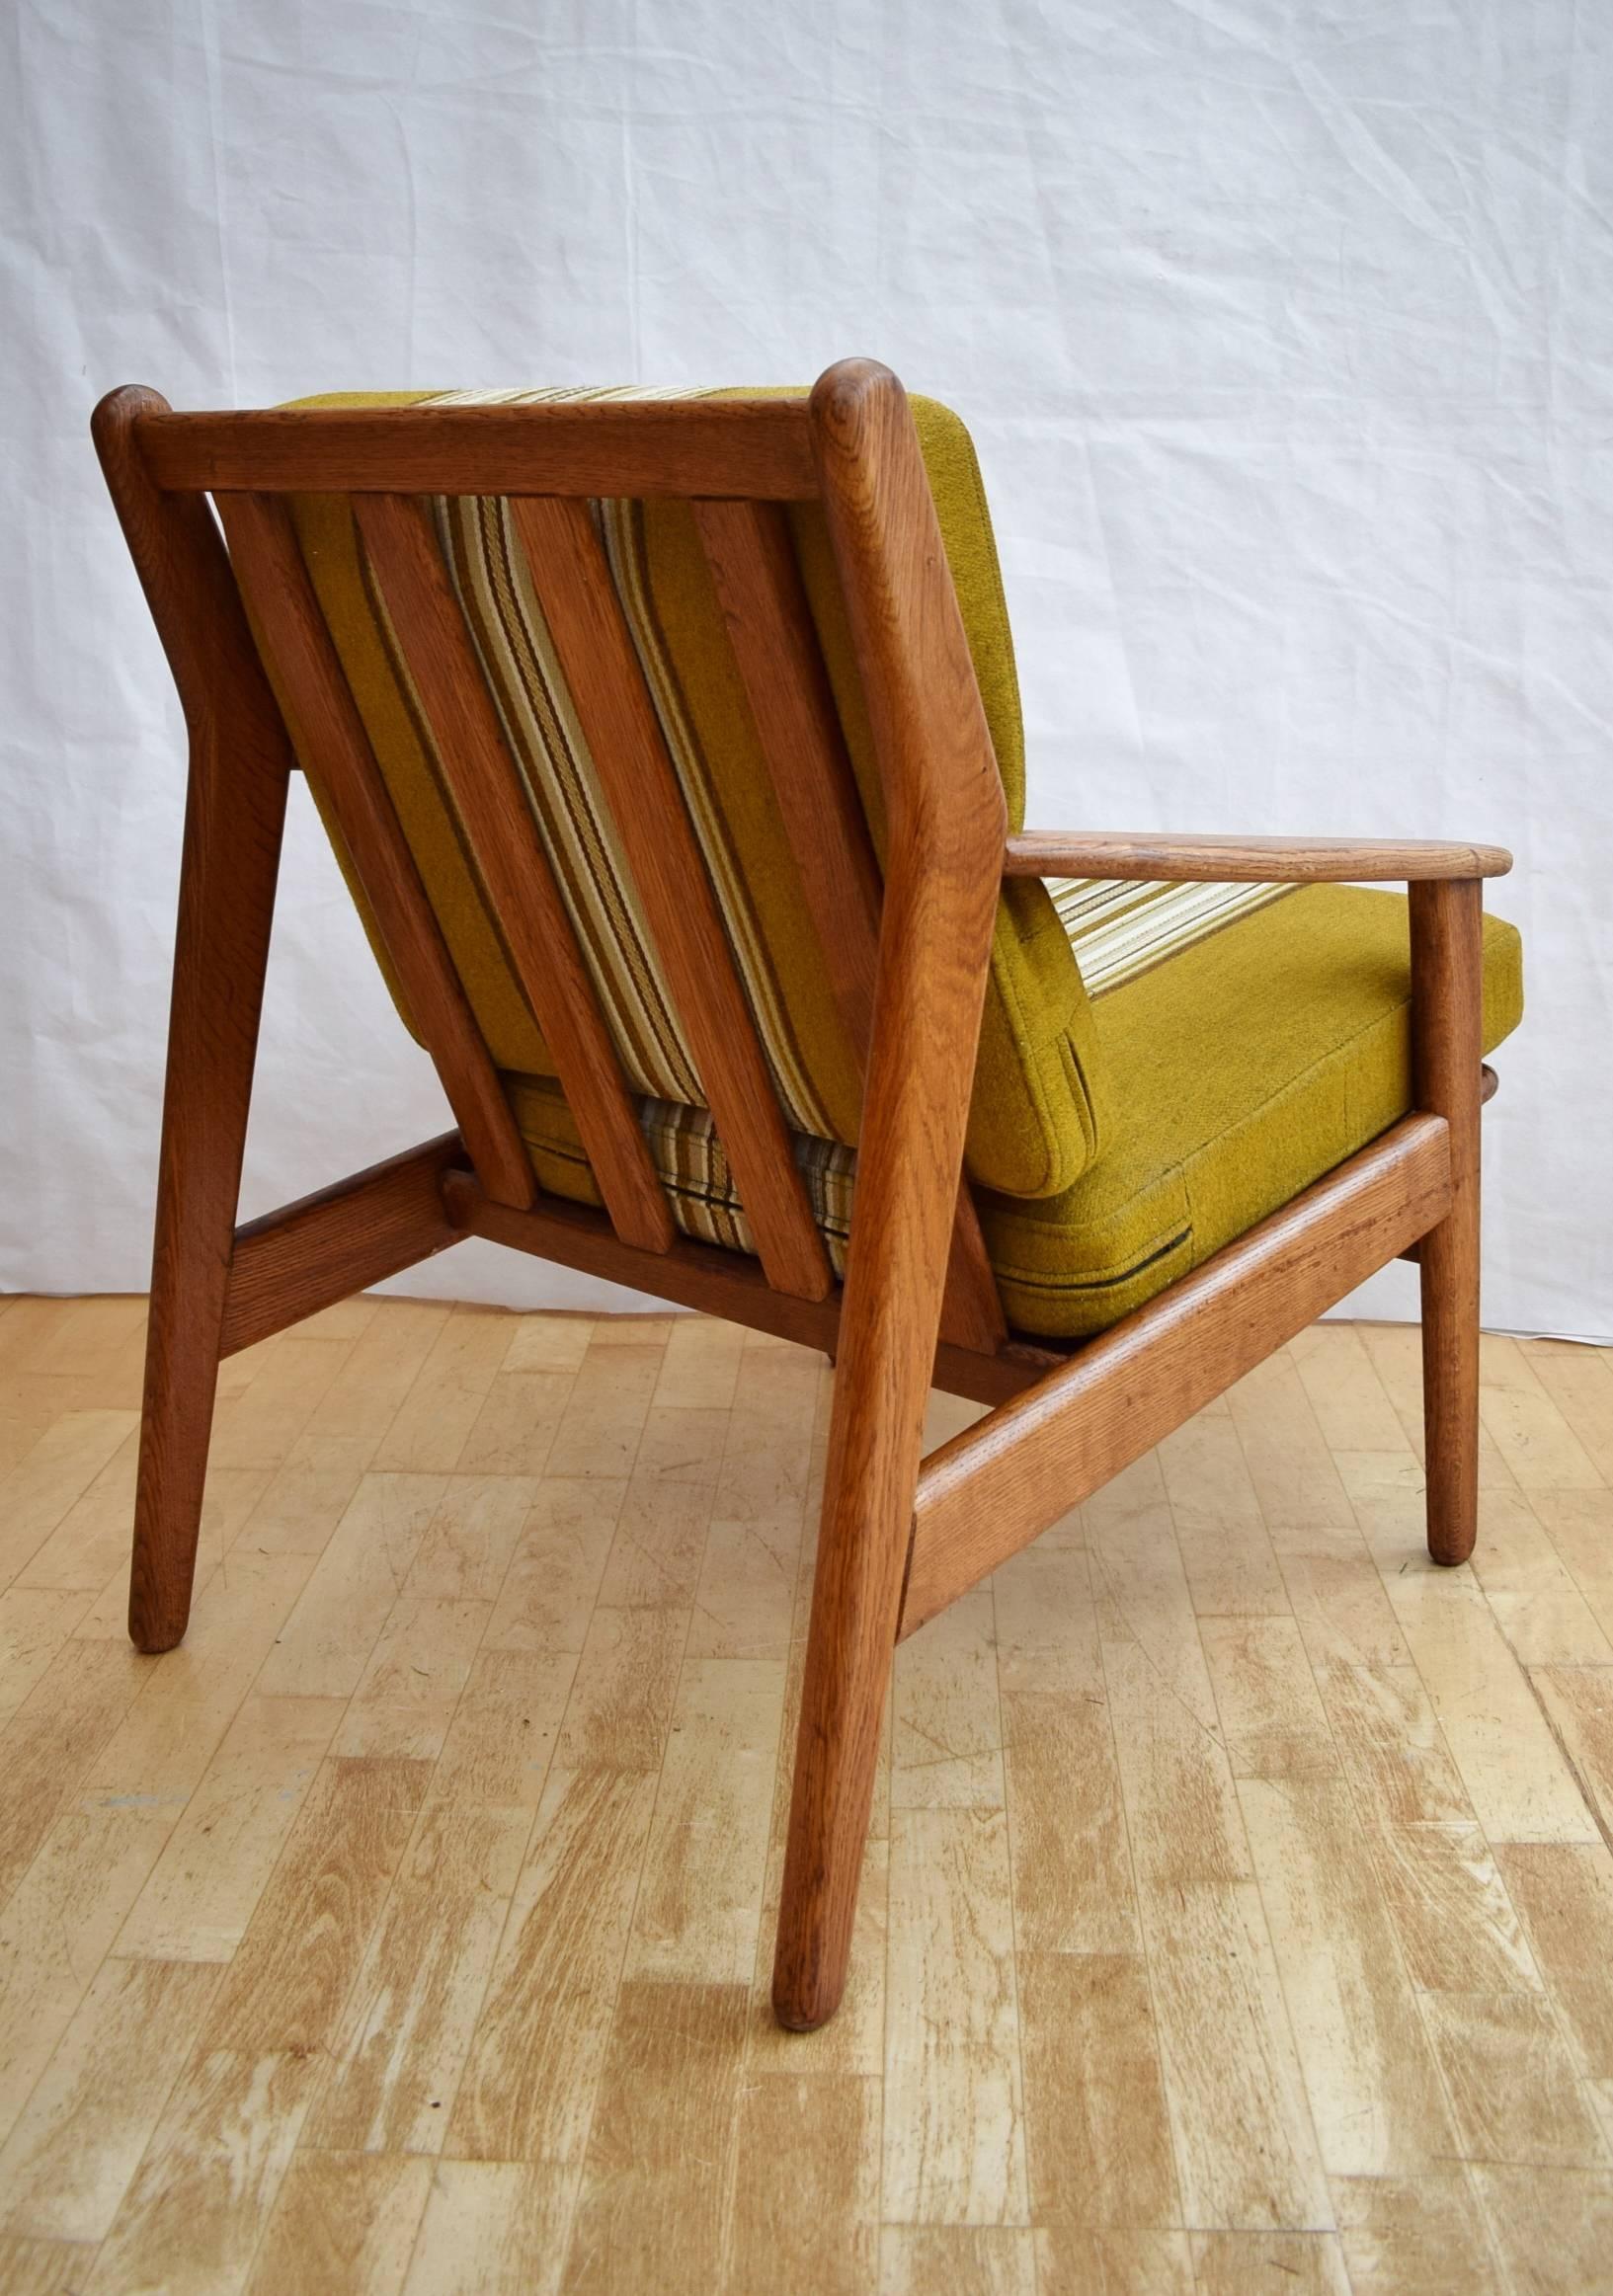 Designer: Poul M. Volther

Manufacturer: FDB Møbler

Country: Denmark

Date: 1955

Material: Solid oak frame with sprung Woolen cushions

Maximum Dimensions: Width 67 cm, depth 82 cm, height 80 cm and seat height 46 cm

Condition: